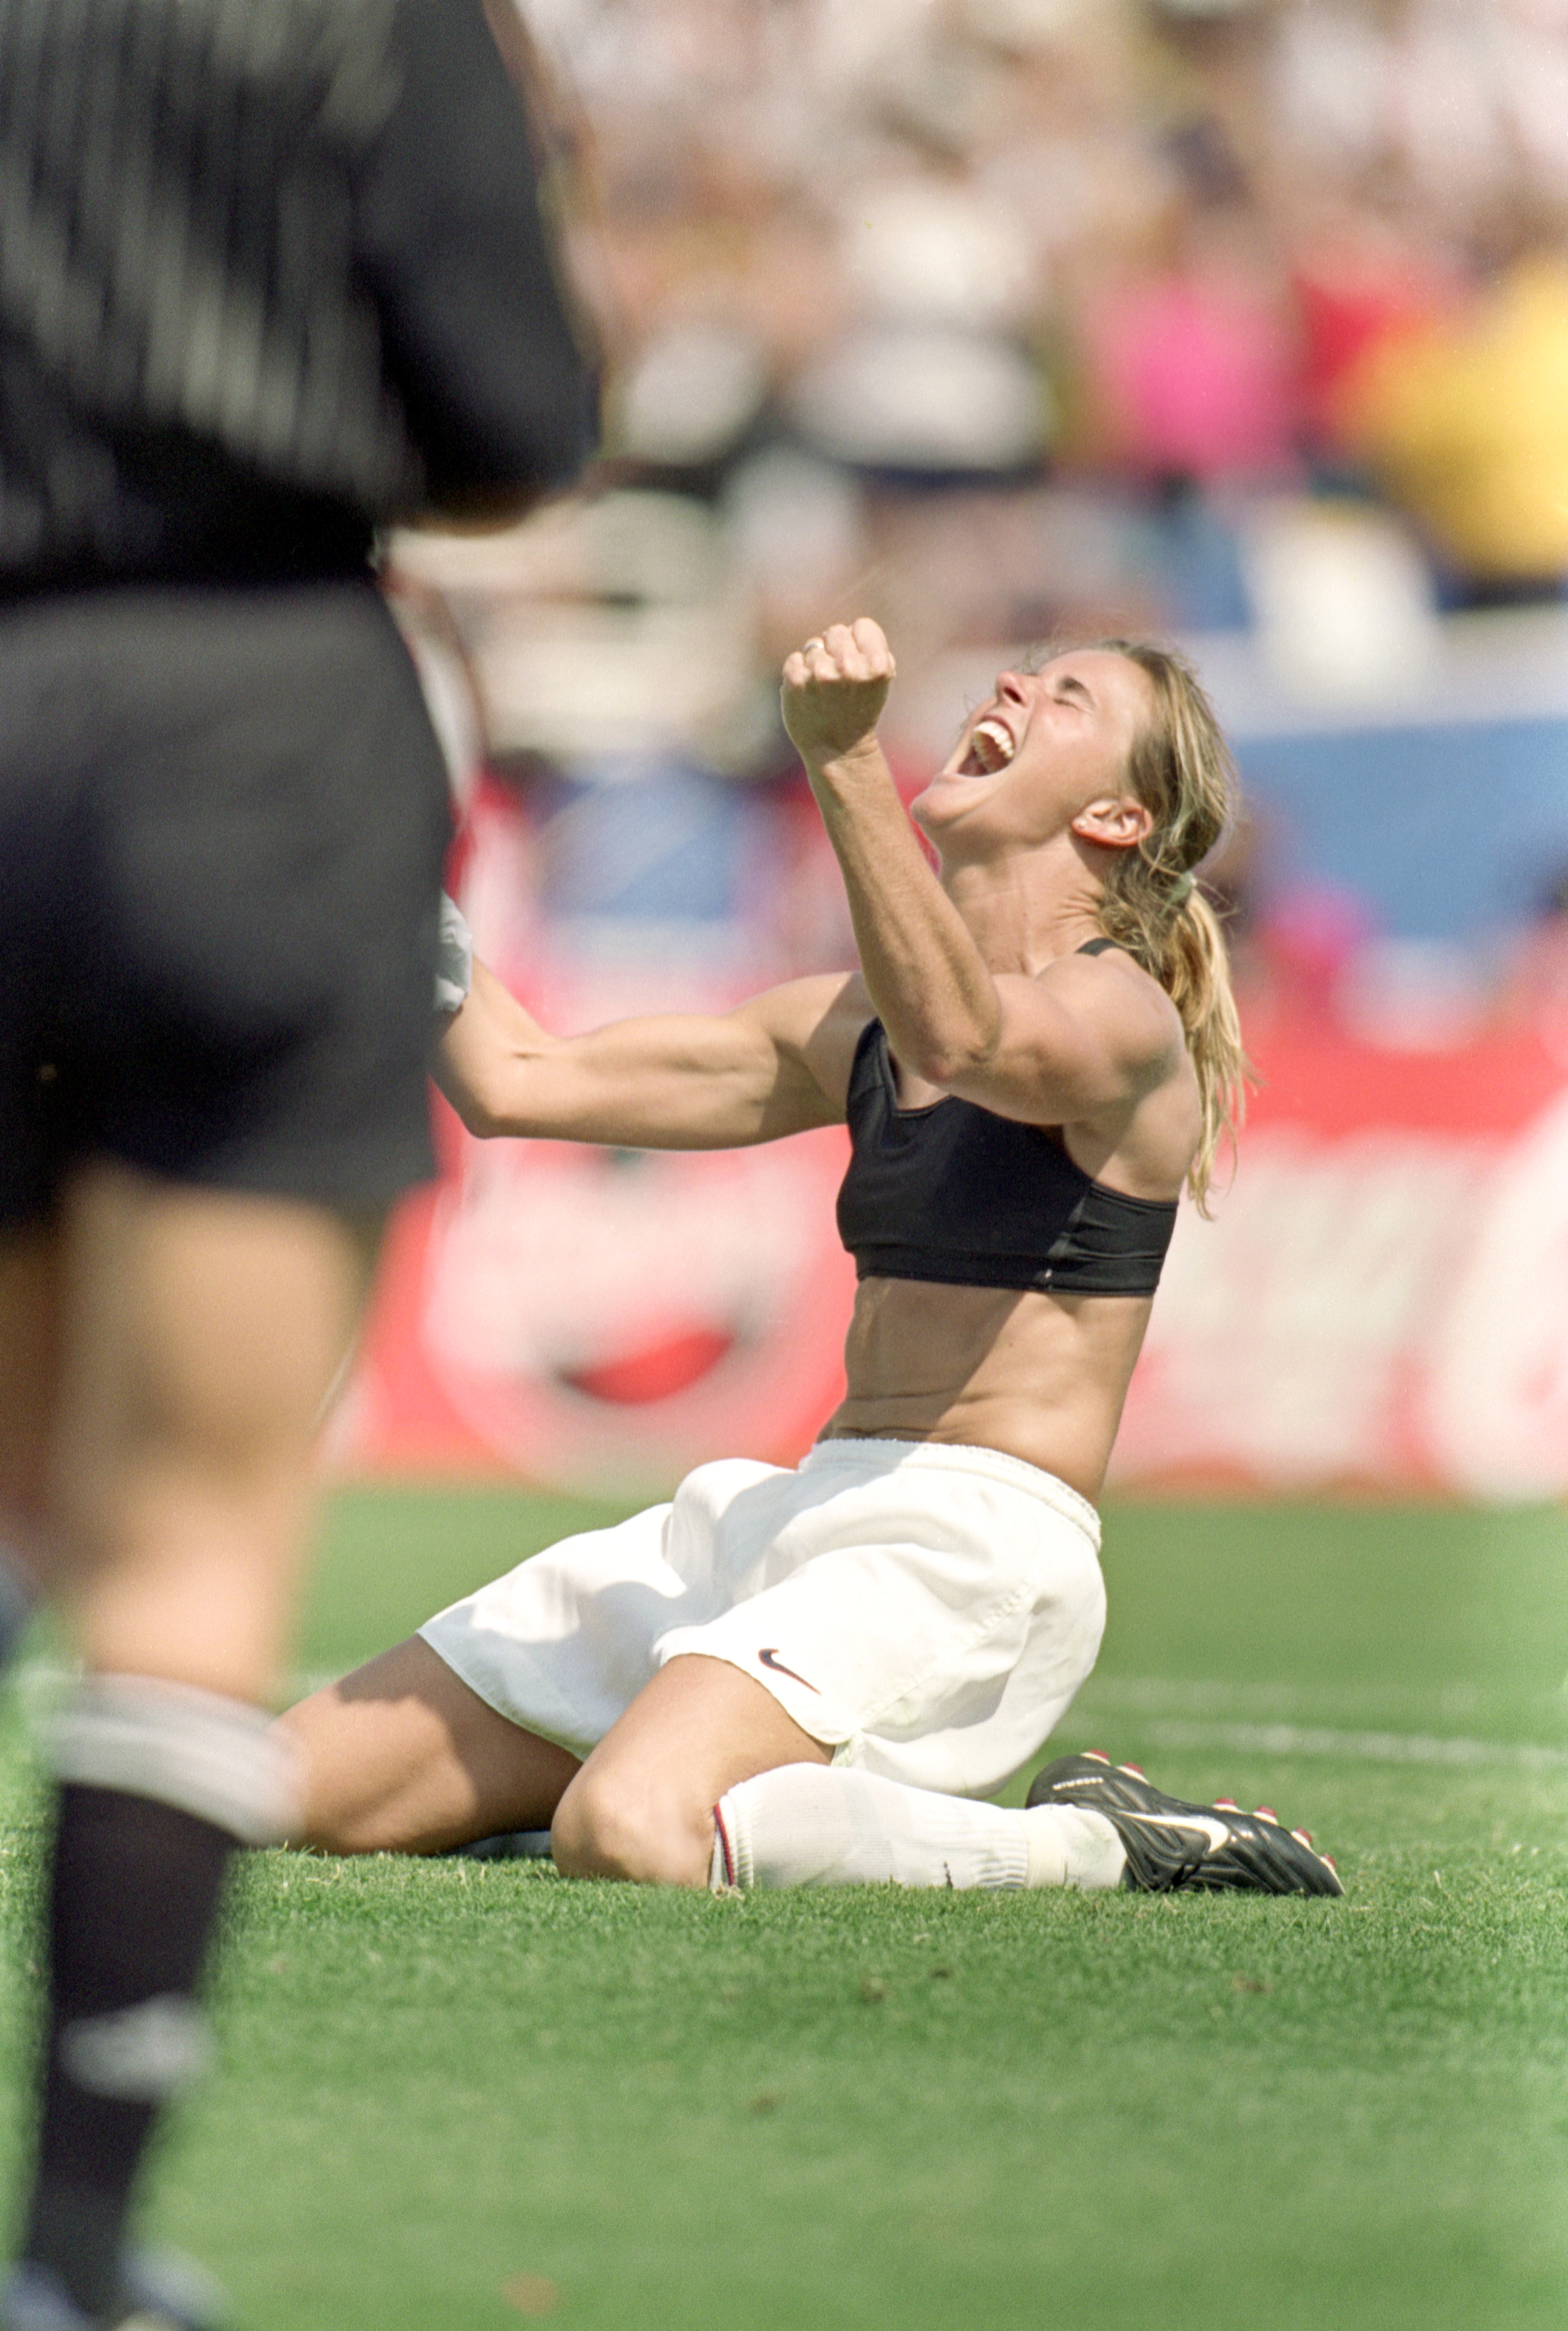 PASADENA, CA - JULY 10:  Brandi Chastain of Team USA celebrates during the Women's World Cup against Team China at The Rose Bowl on July 10, 1999 in Pasadena, California. Team USA won 5-4. (Photo by Jed Jacobsohn/Getty Images)